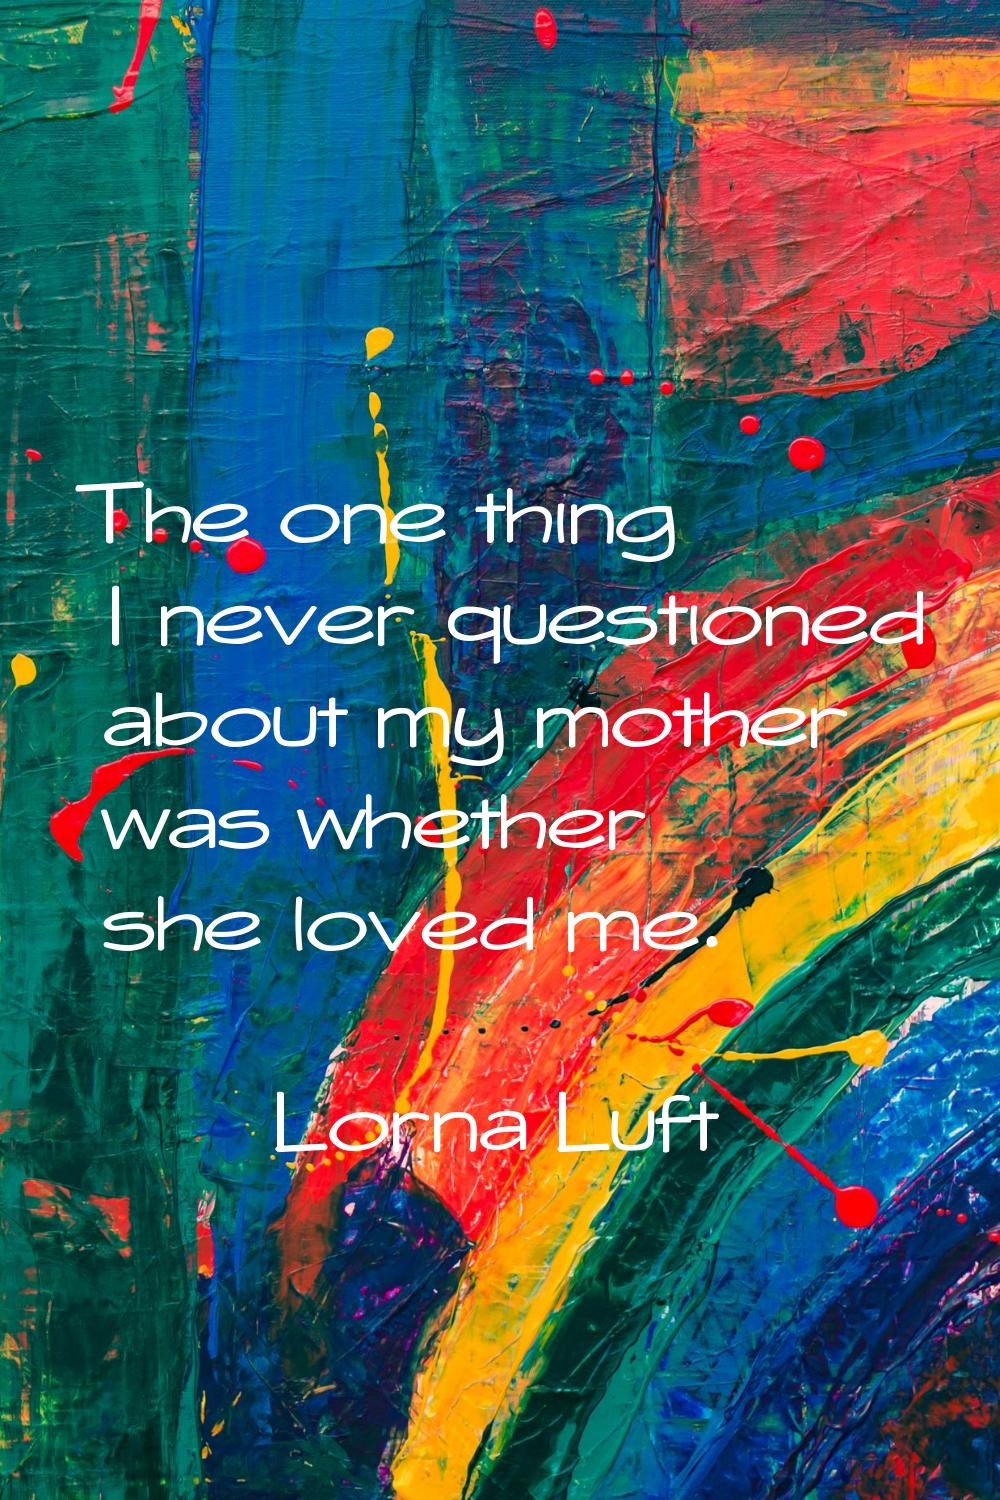 The one thing I never questioned about my mother was whether she loved me.